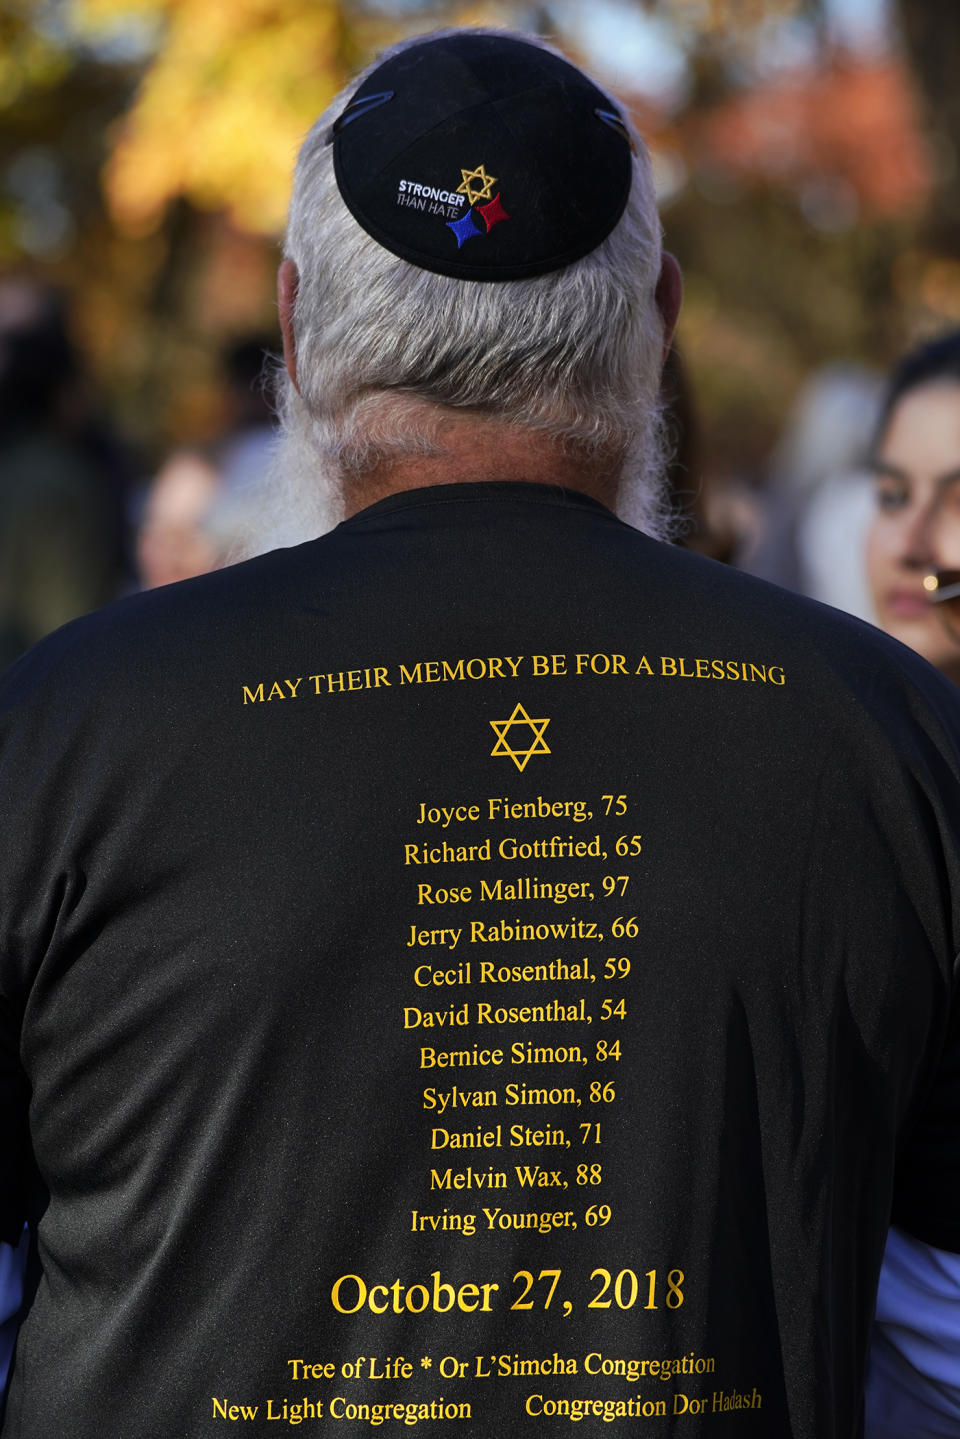 FILE - Kris Kepler, of Pittsburgh, attends a commemoration ceremony, Oct. 27, 2022, in Schenley Park, in memory of the 11 worshippers killed four years ago when a gunman opened fire at the Tree of Life synagogue in the Squirrel Hill neighborhood in Pittsburgh. The long-delayed capital murder trial of Robert Bowers in the 2018 Pittsburgh synagogue massacre will begin with jury selection beginning April 24, 2023, a federal judge has ruled. (AP Photo/Gene J. Puskar, File)